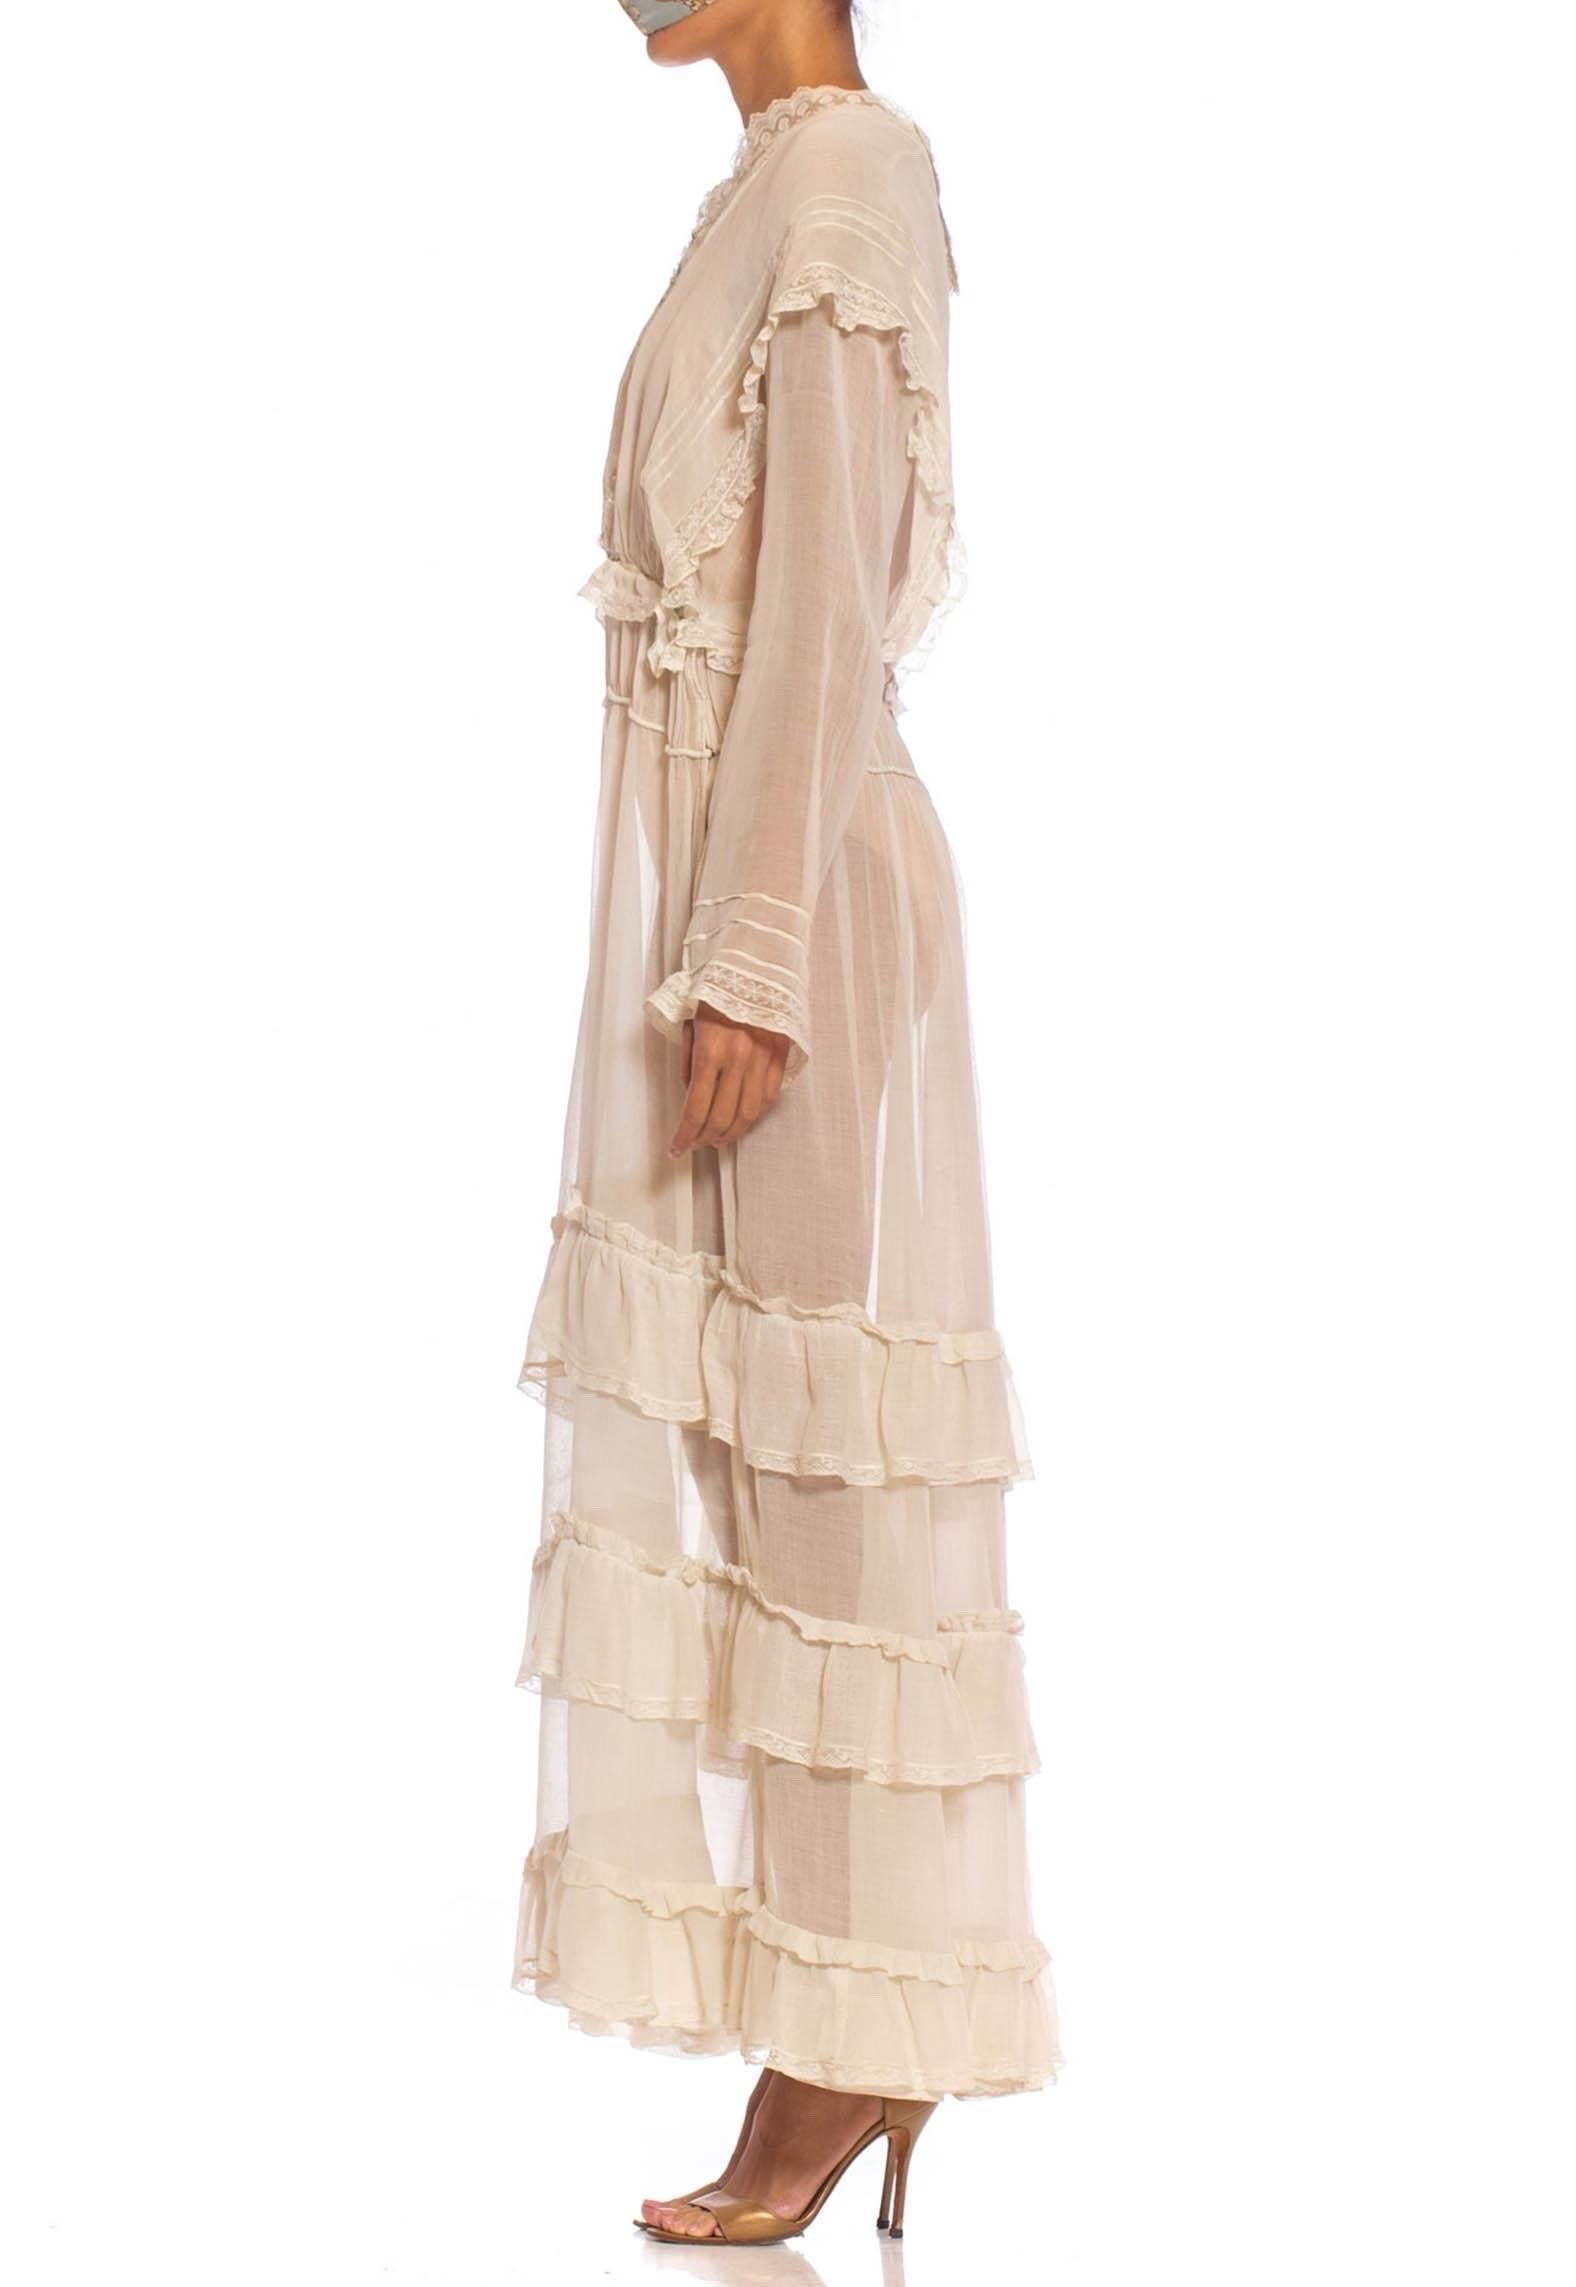 Edwardian Off White Organic Cotton Voile & Lace Long Sleeved Ruffled Tea Dress In Excellent Condition For Sale In New York, NY